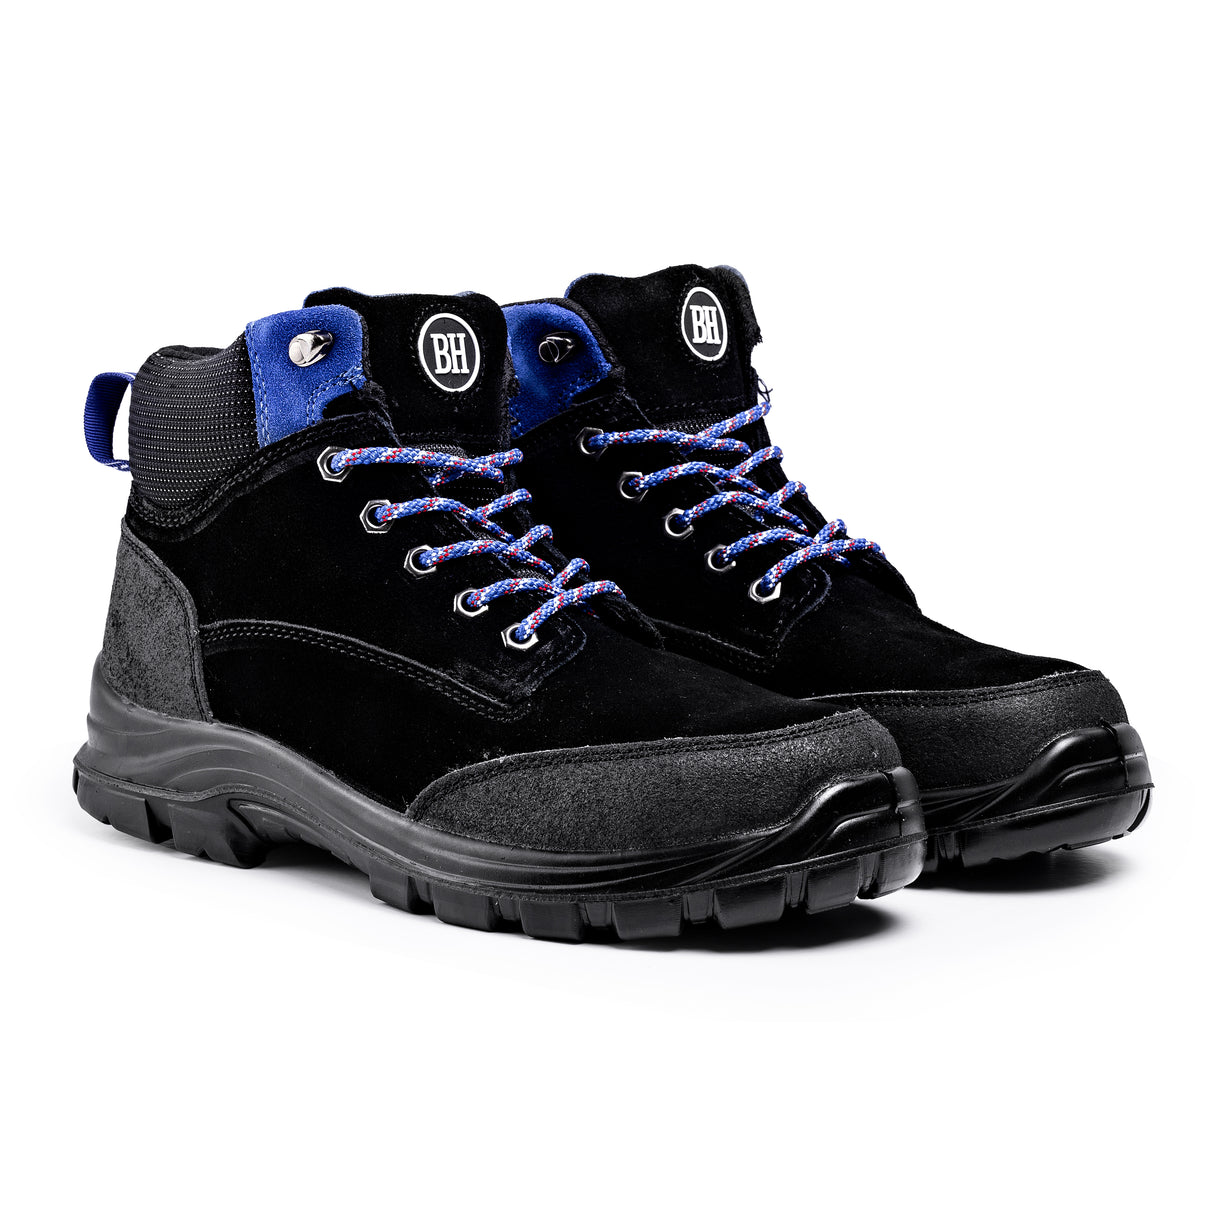 HEAVY DUTY SAFETY Steel Toe Cap Boots with Steel Mid Sole Protection S3 SRC